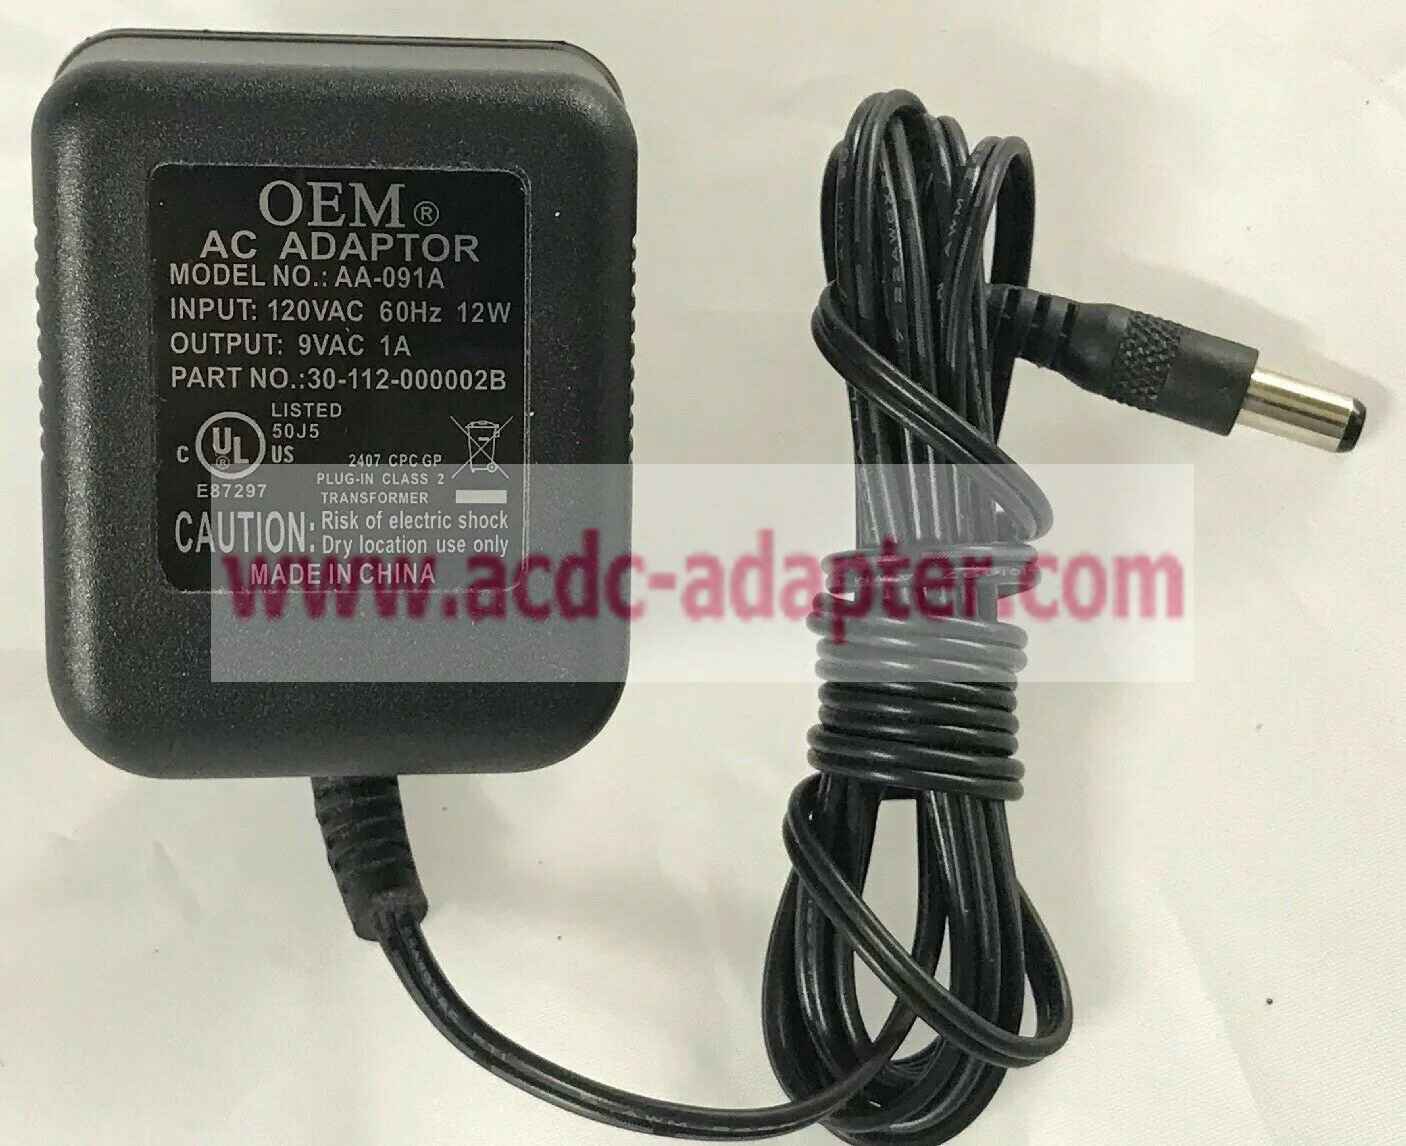 New 9VAC 1A AC Adaptor AA-091A 30-112-000002B Power Supply Charger